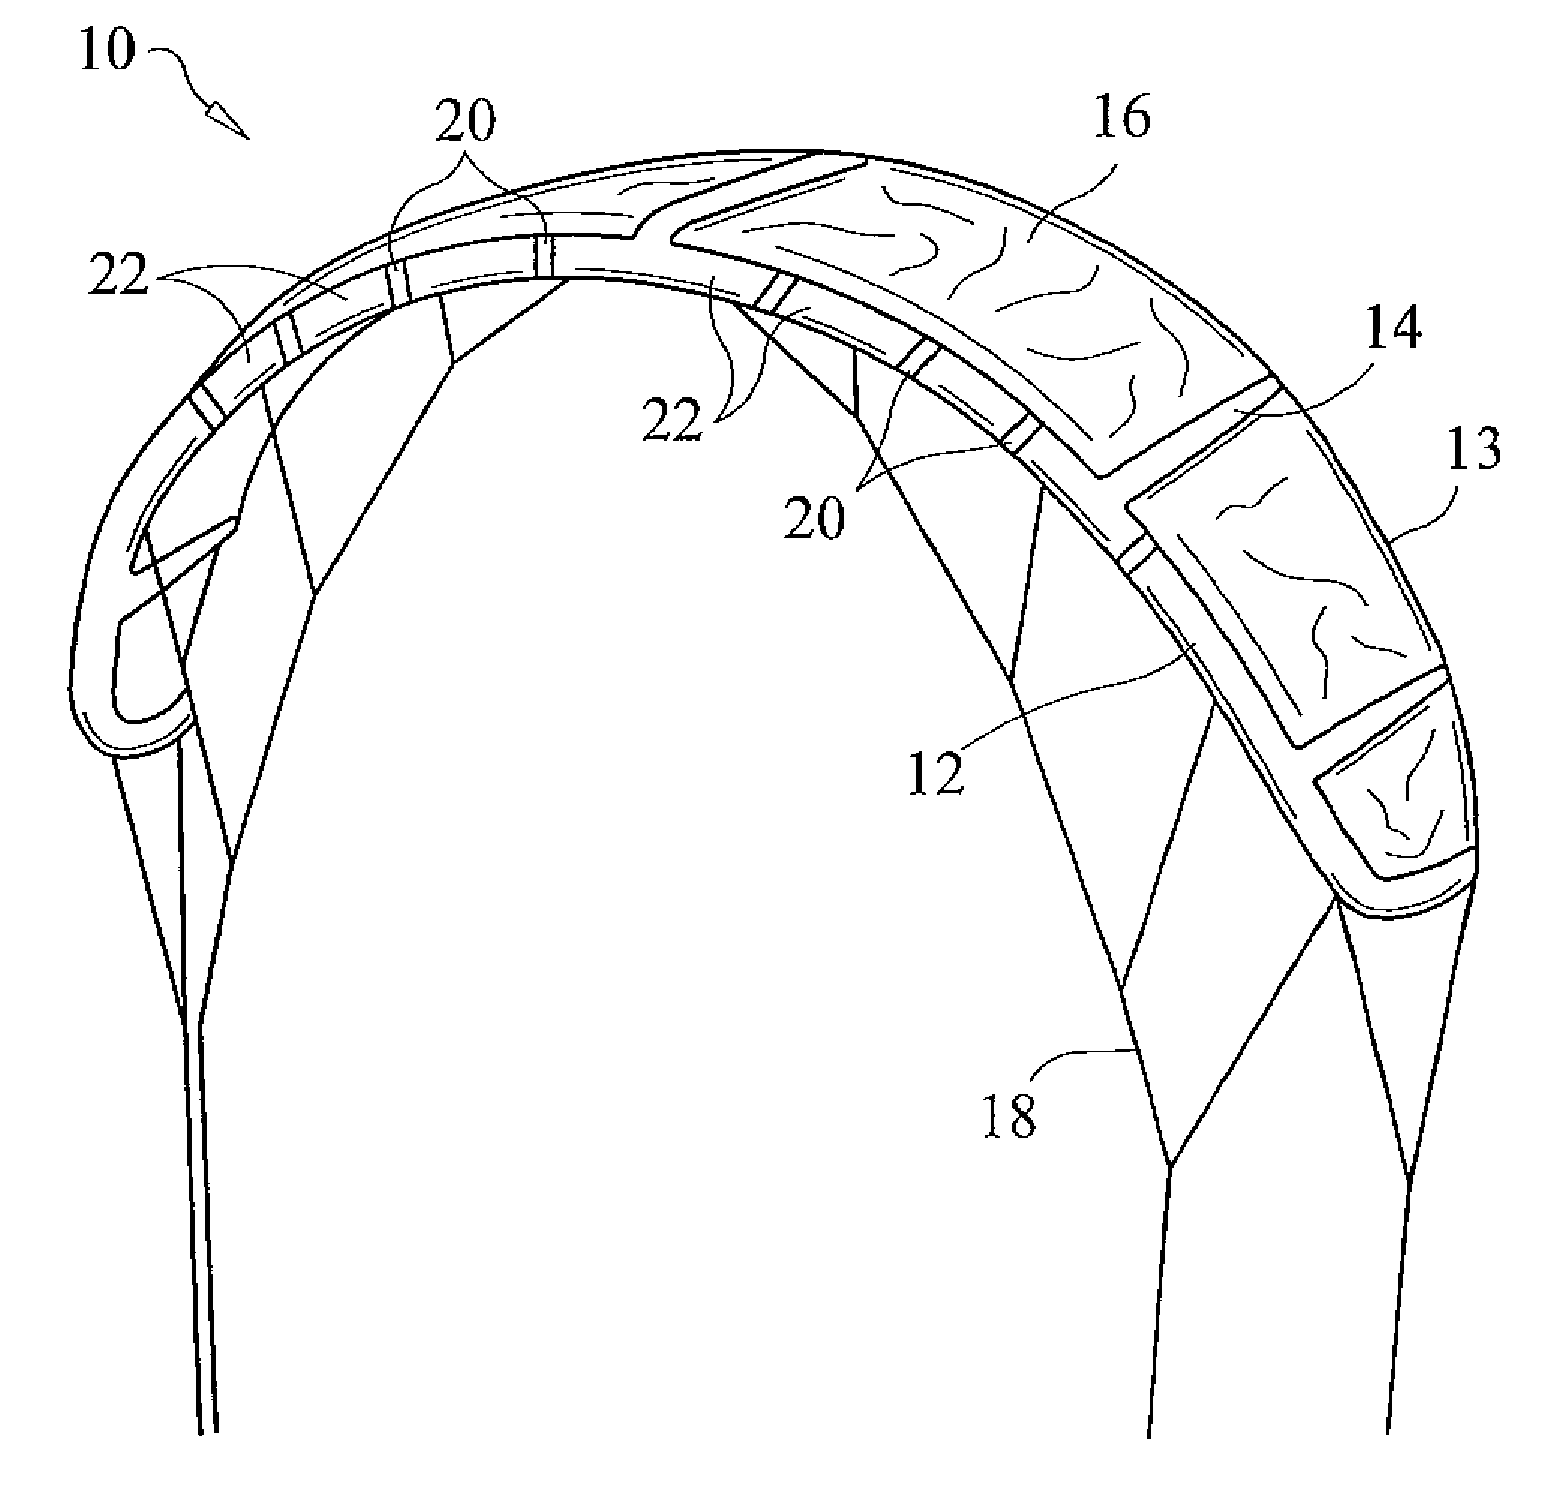 Traction kite with deformable leading edge